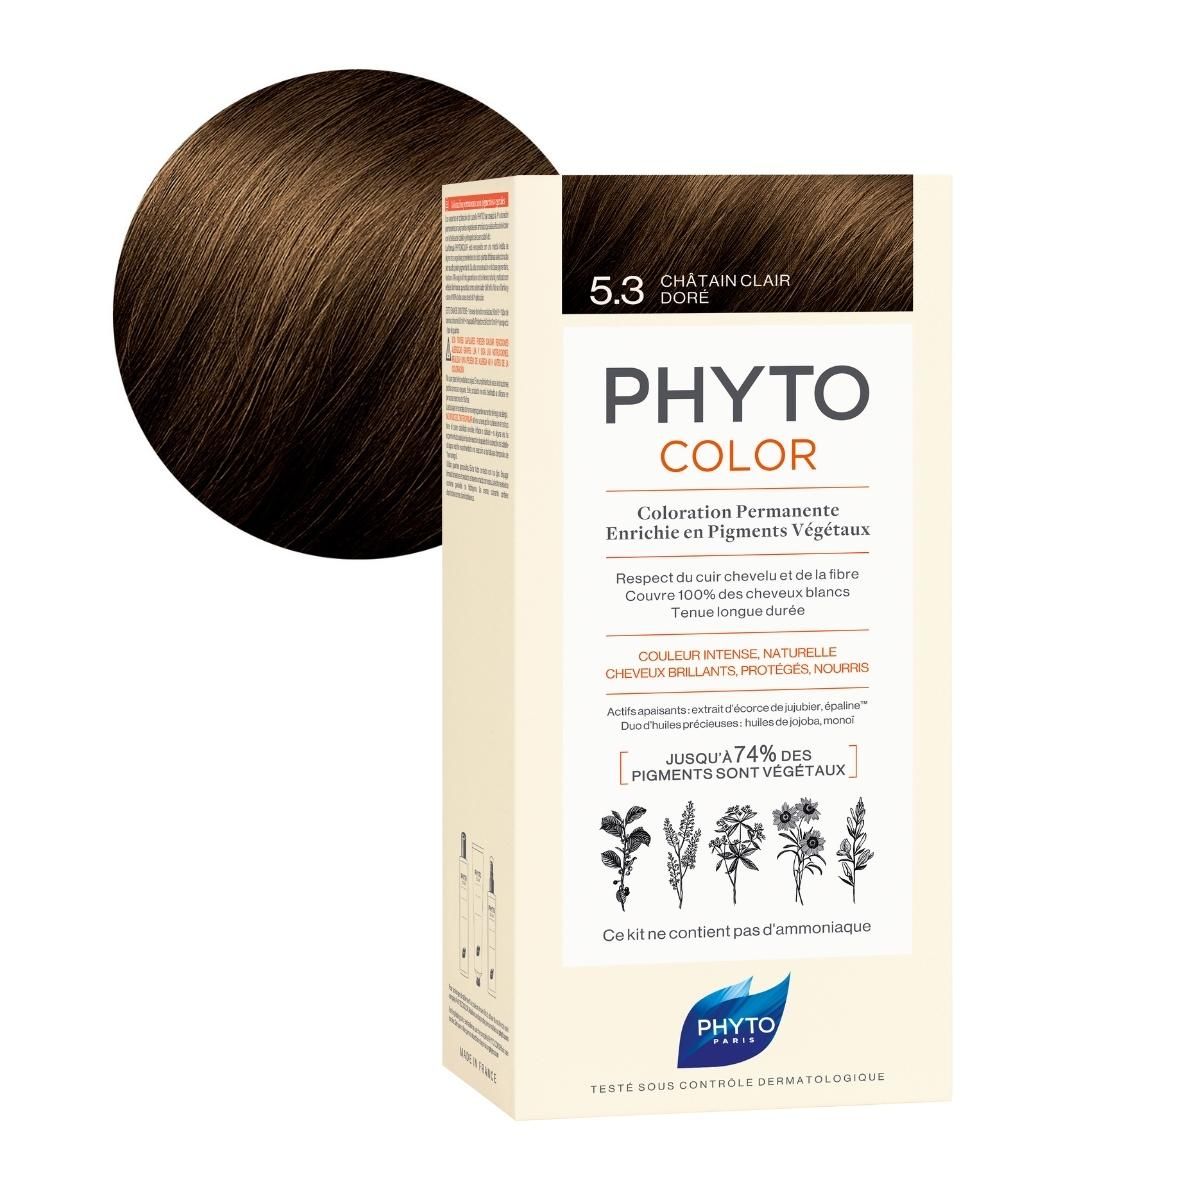 PHYTOCOLOR : things to know about natural hair dye